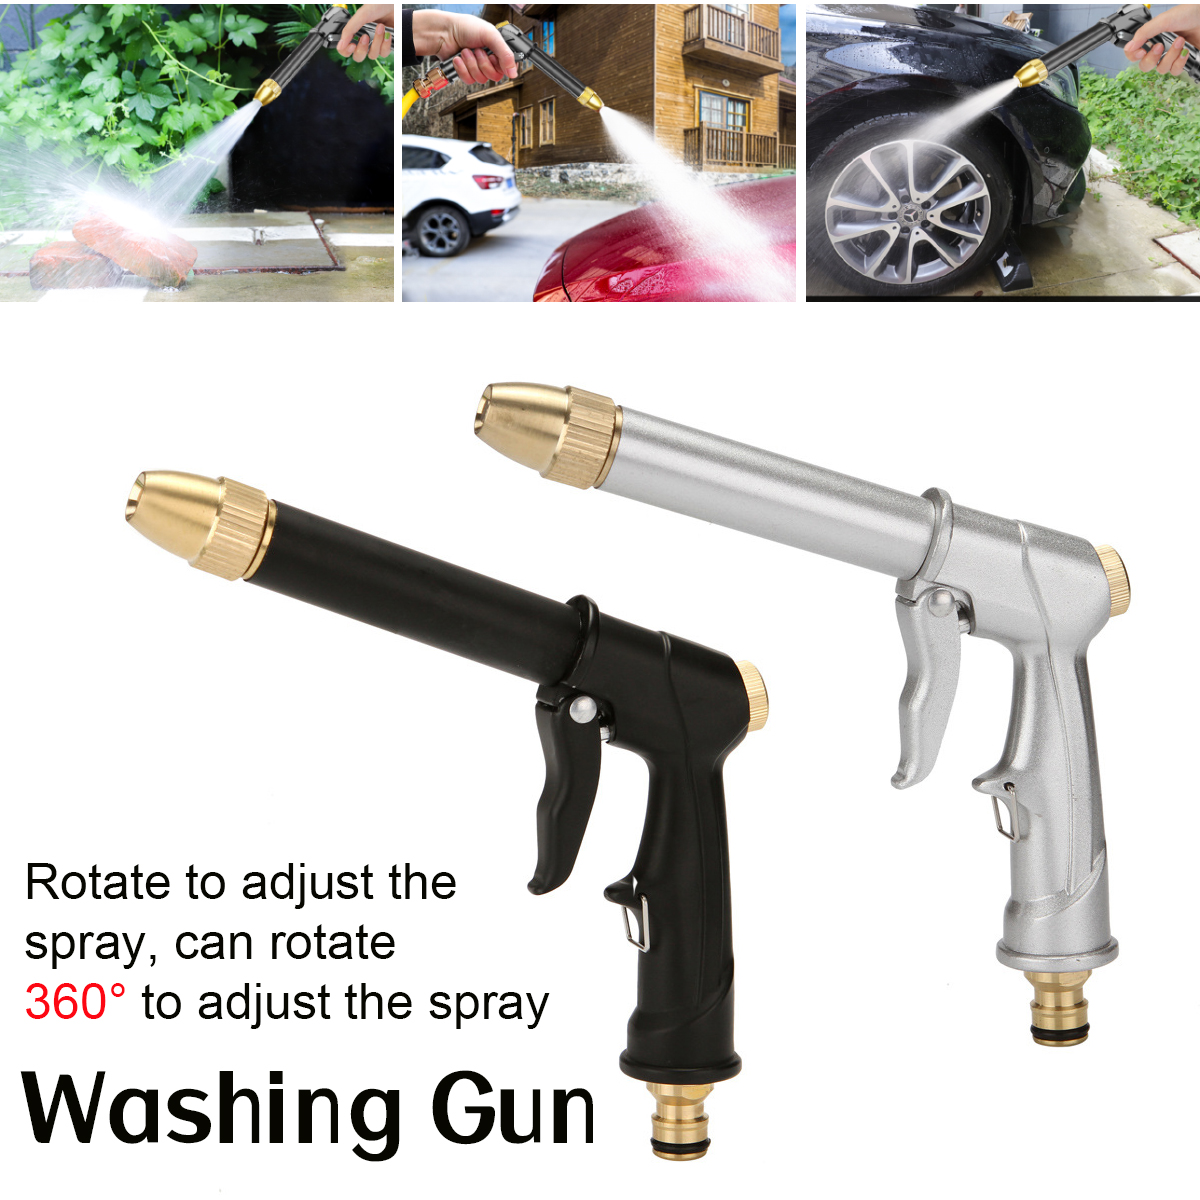 10-15m-Multi-functional-High-Pressure-Car-Washing-Tools-For-Household-Garden-Water-1807479-1